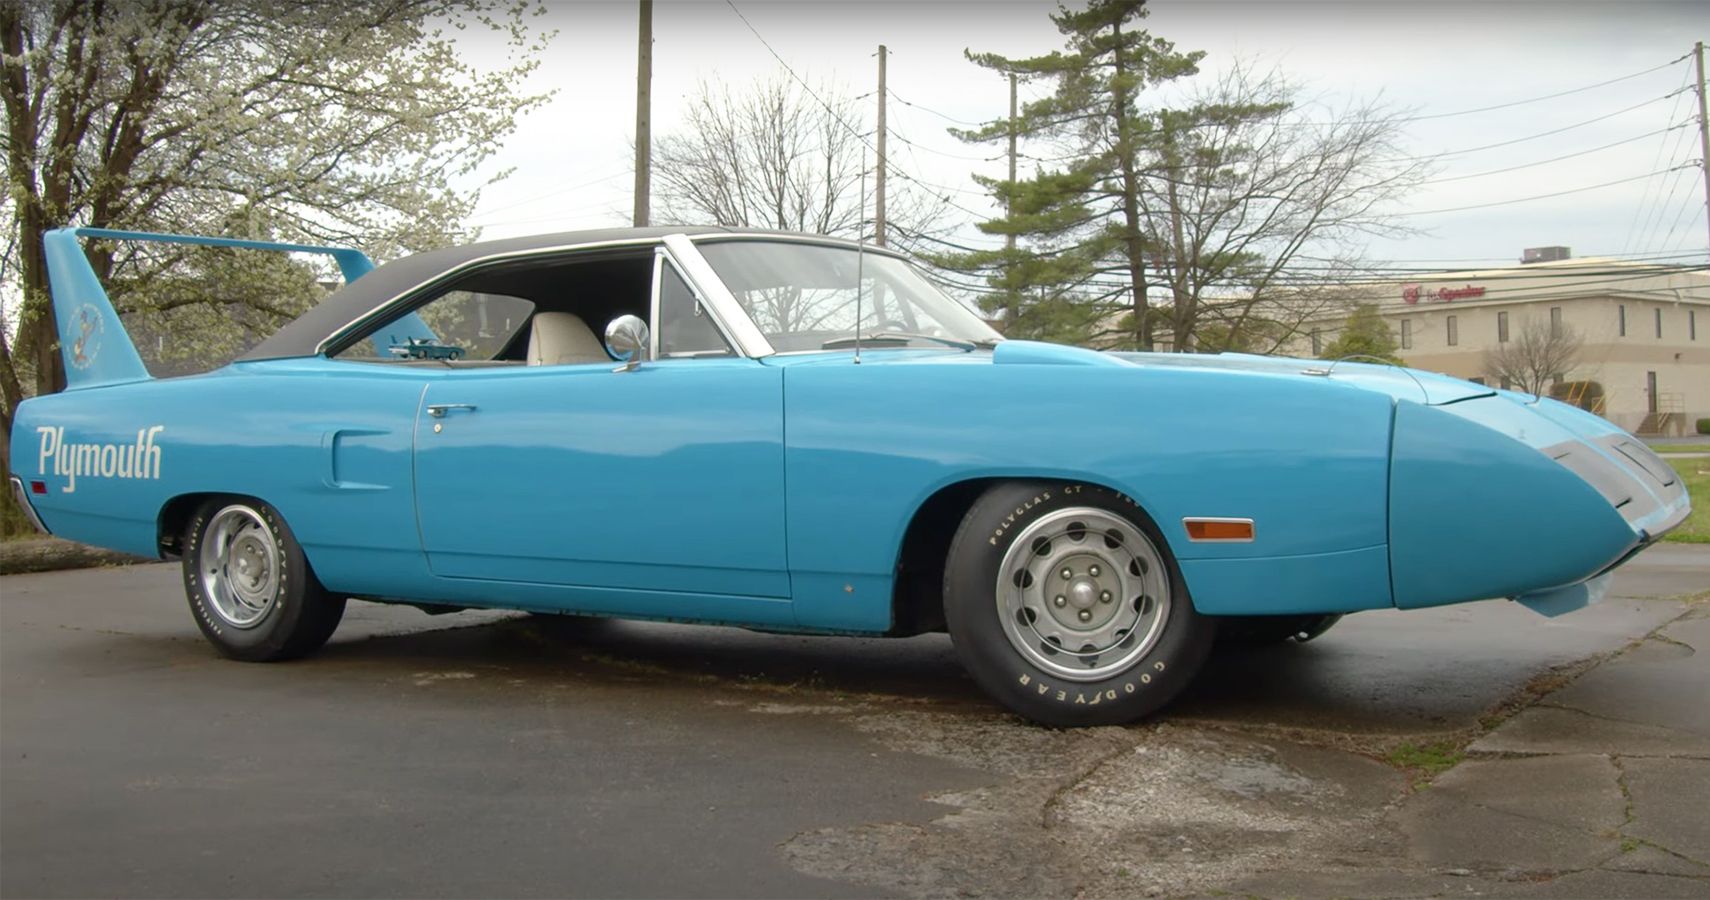 Petty Blue 1970 Plymouth Superbird side view